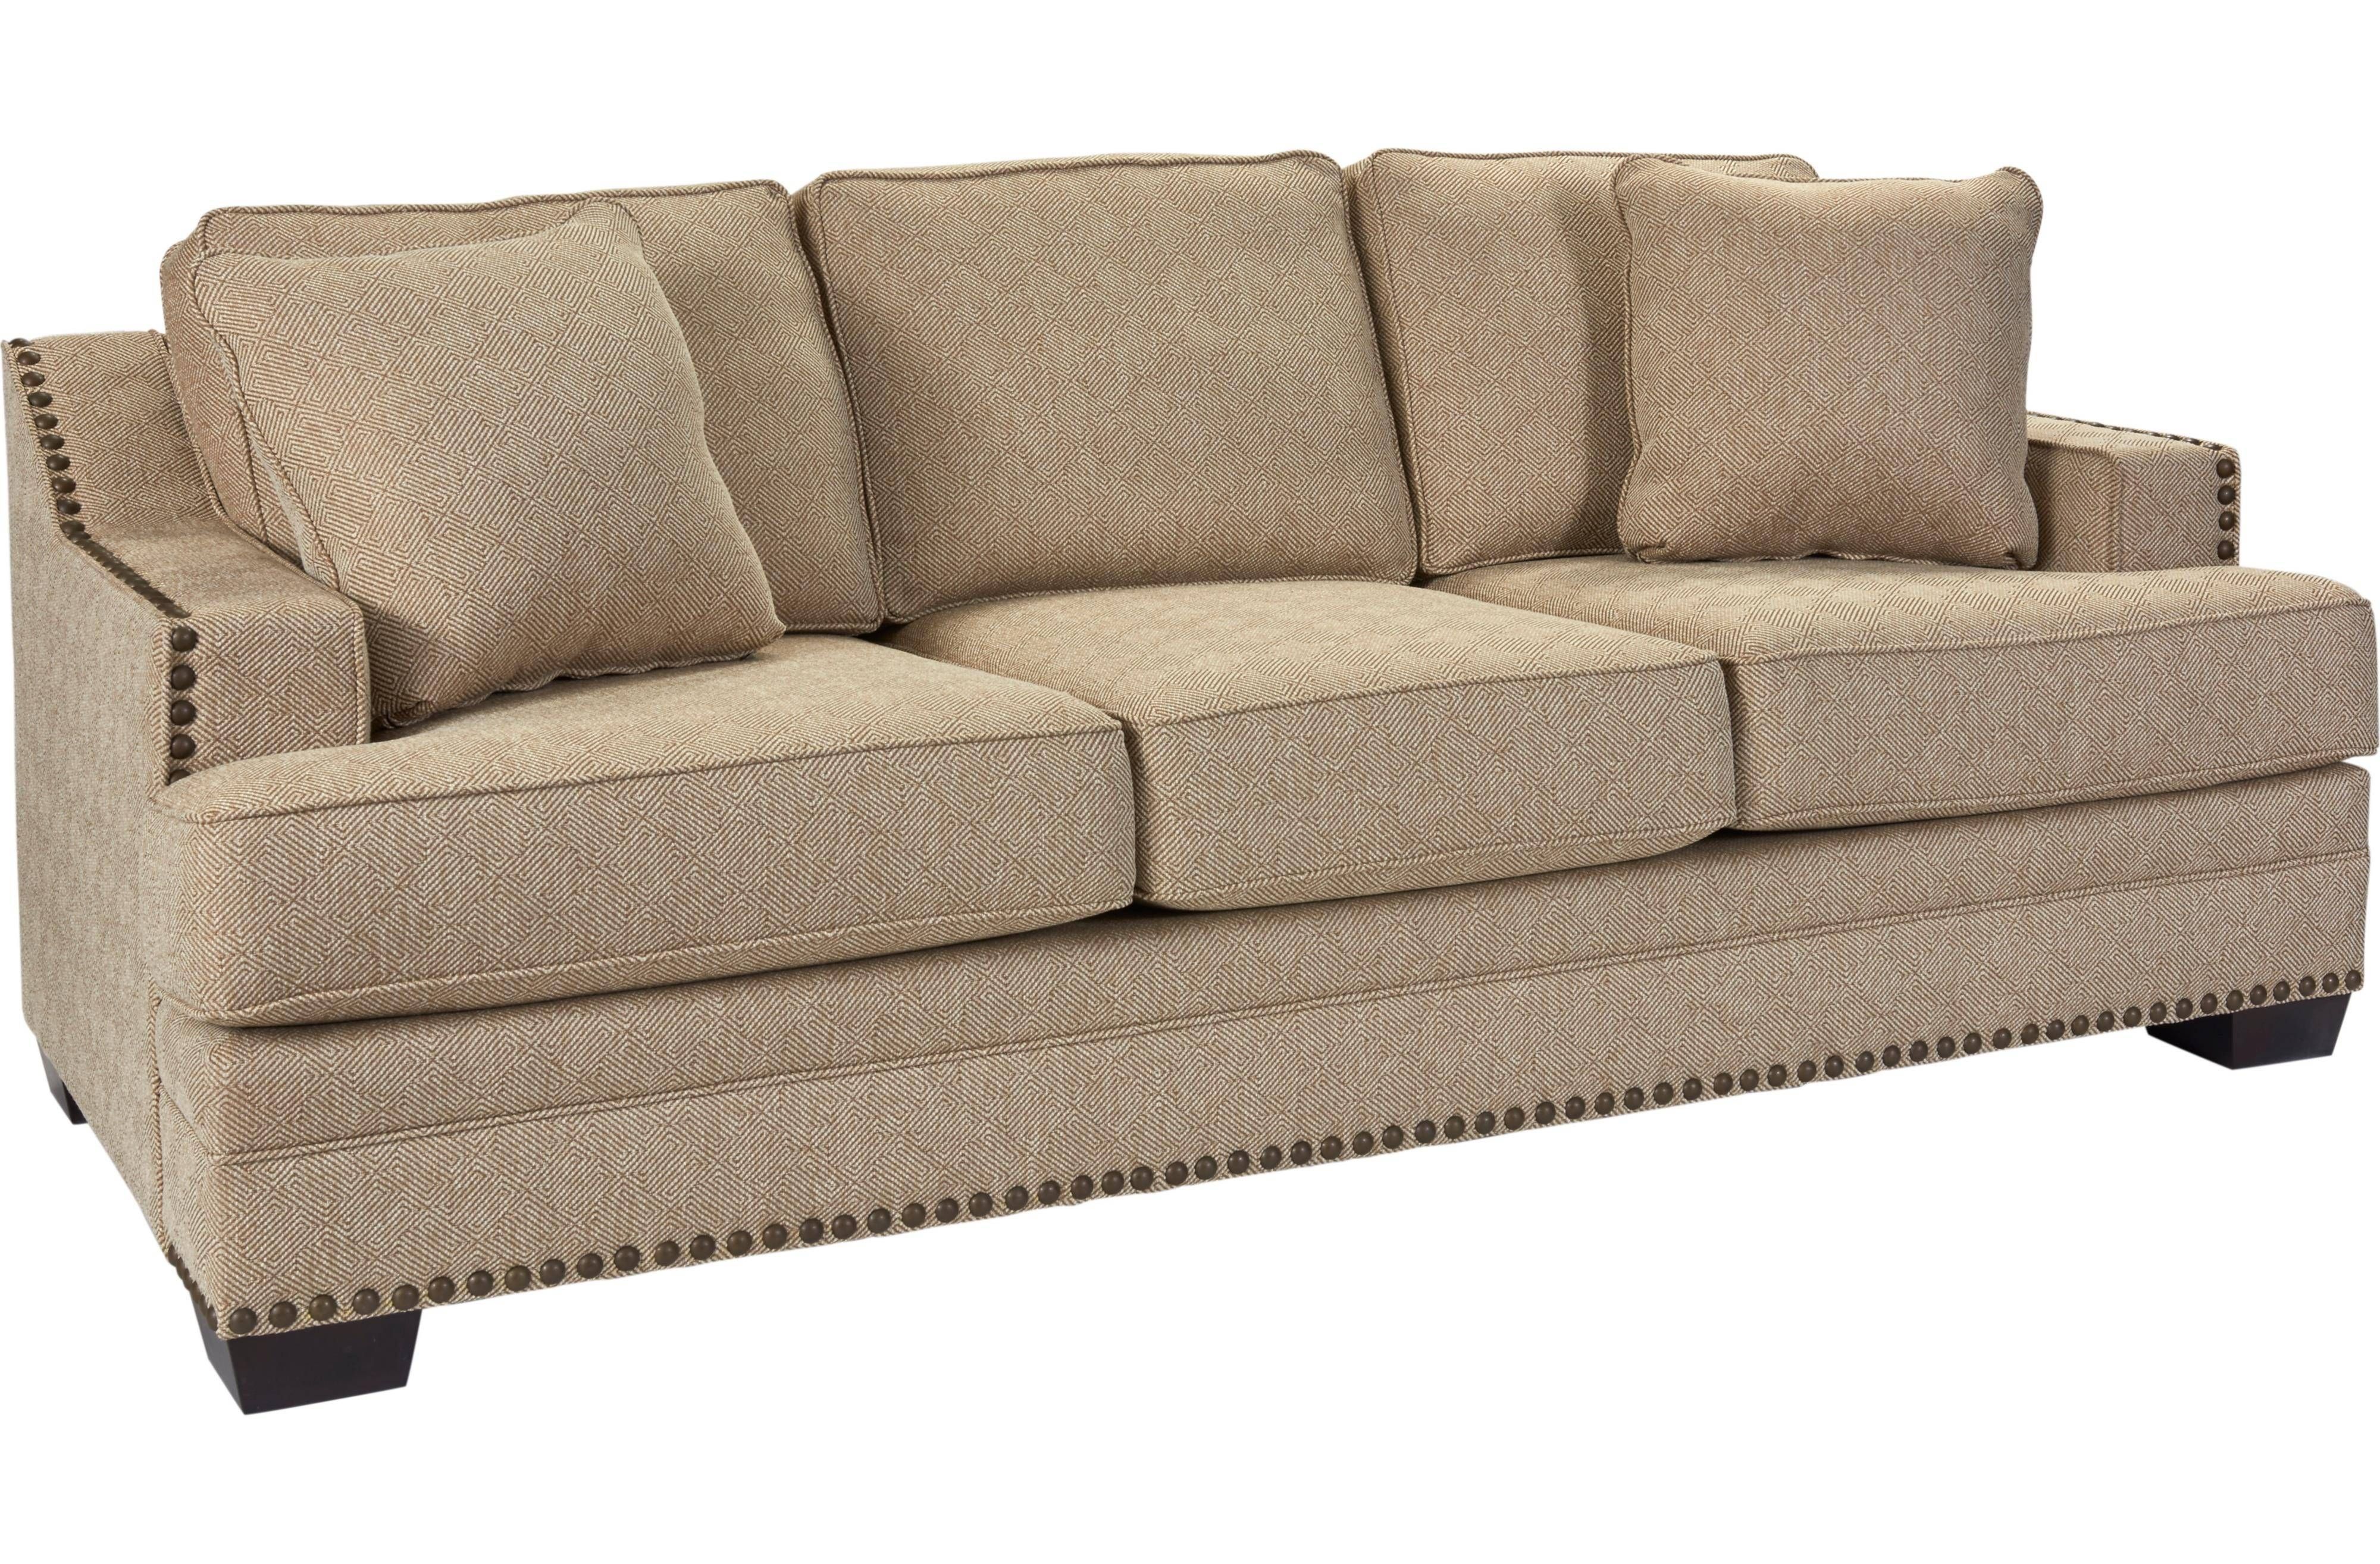 Broyhill Furniture Estes Park Contemporary Sofa With Nailhead Trim Inside Broyhill Sectional Sofas (Photo 26 of 30)